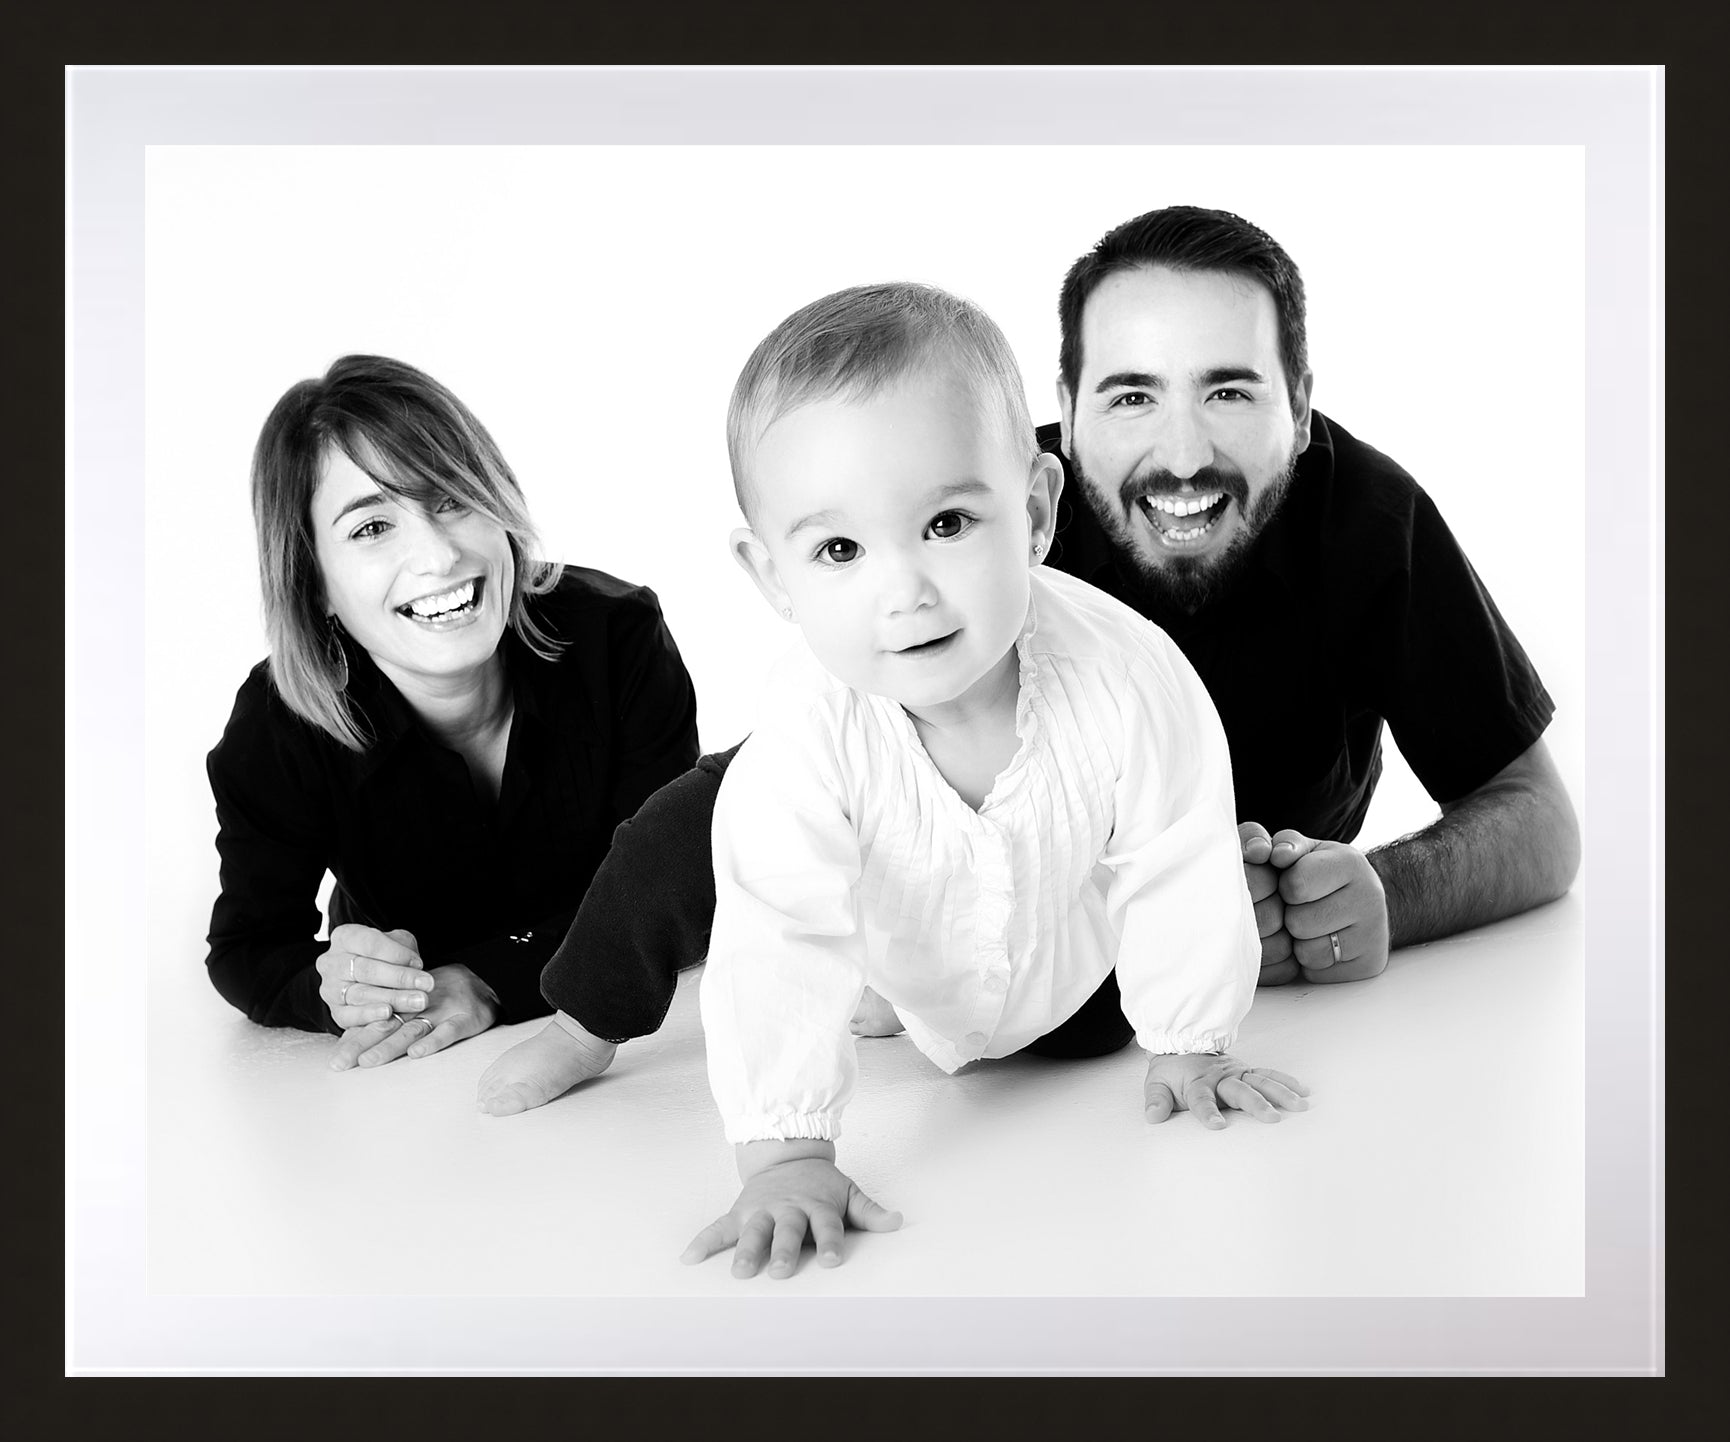 Gallery style picture framing with happy family